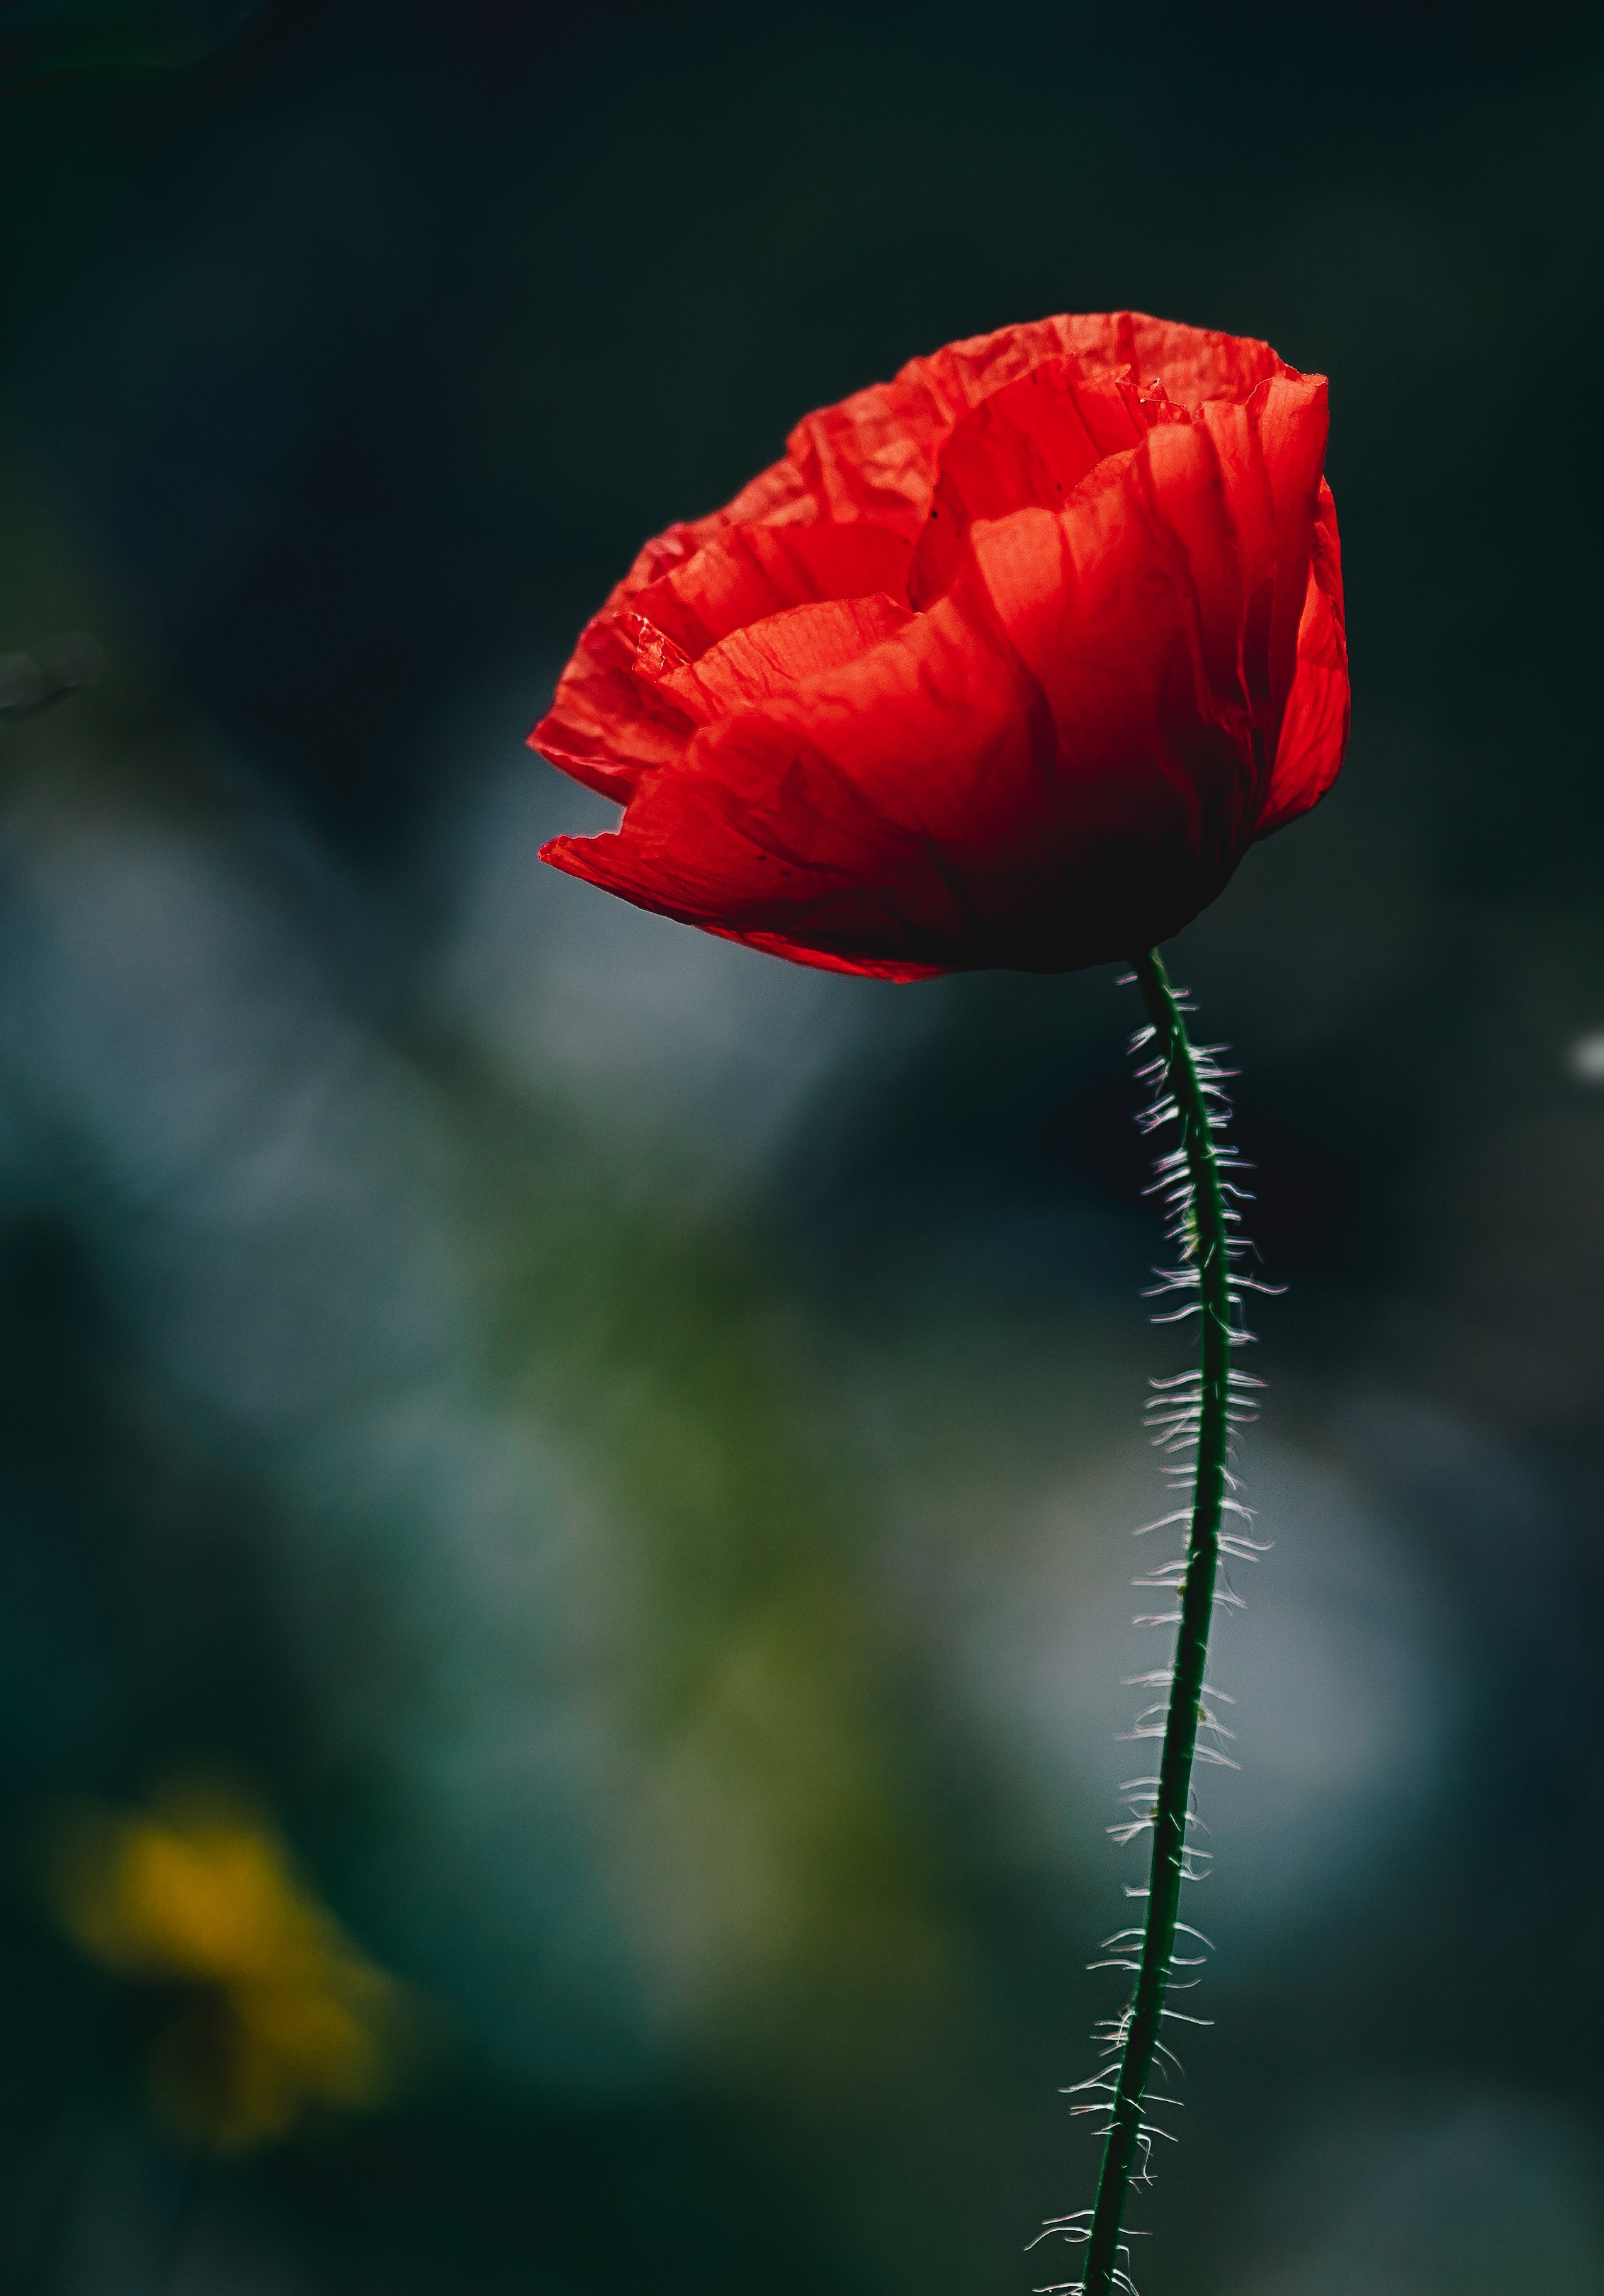 79680 download wallpaper blur, flowers, red, flower, bud, smooth, stem, stalk, poppy screensavers and pictures for free